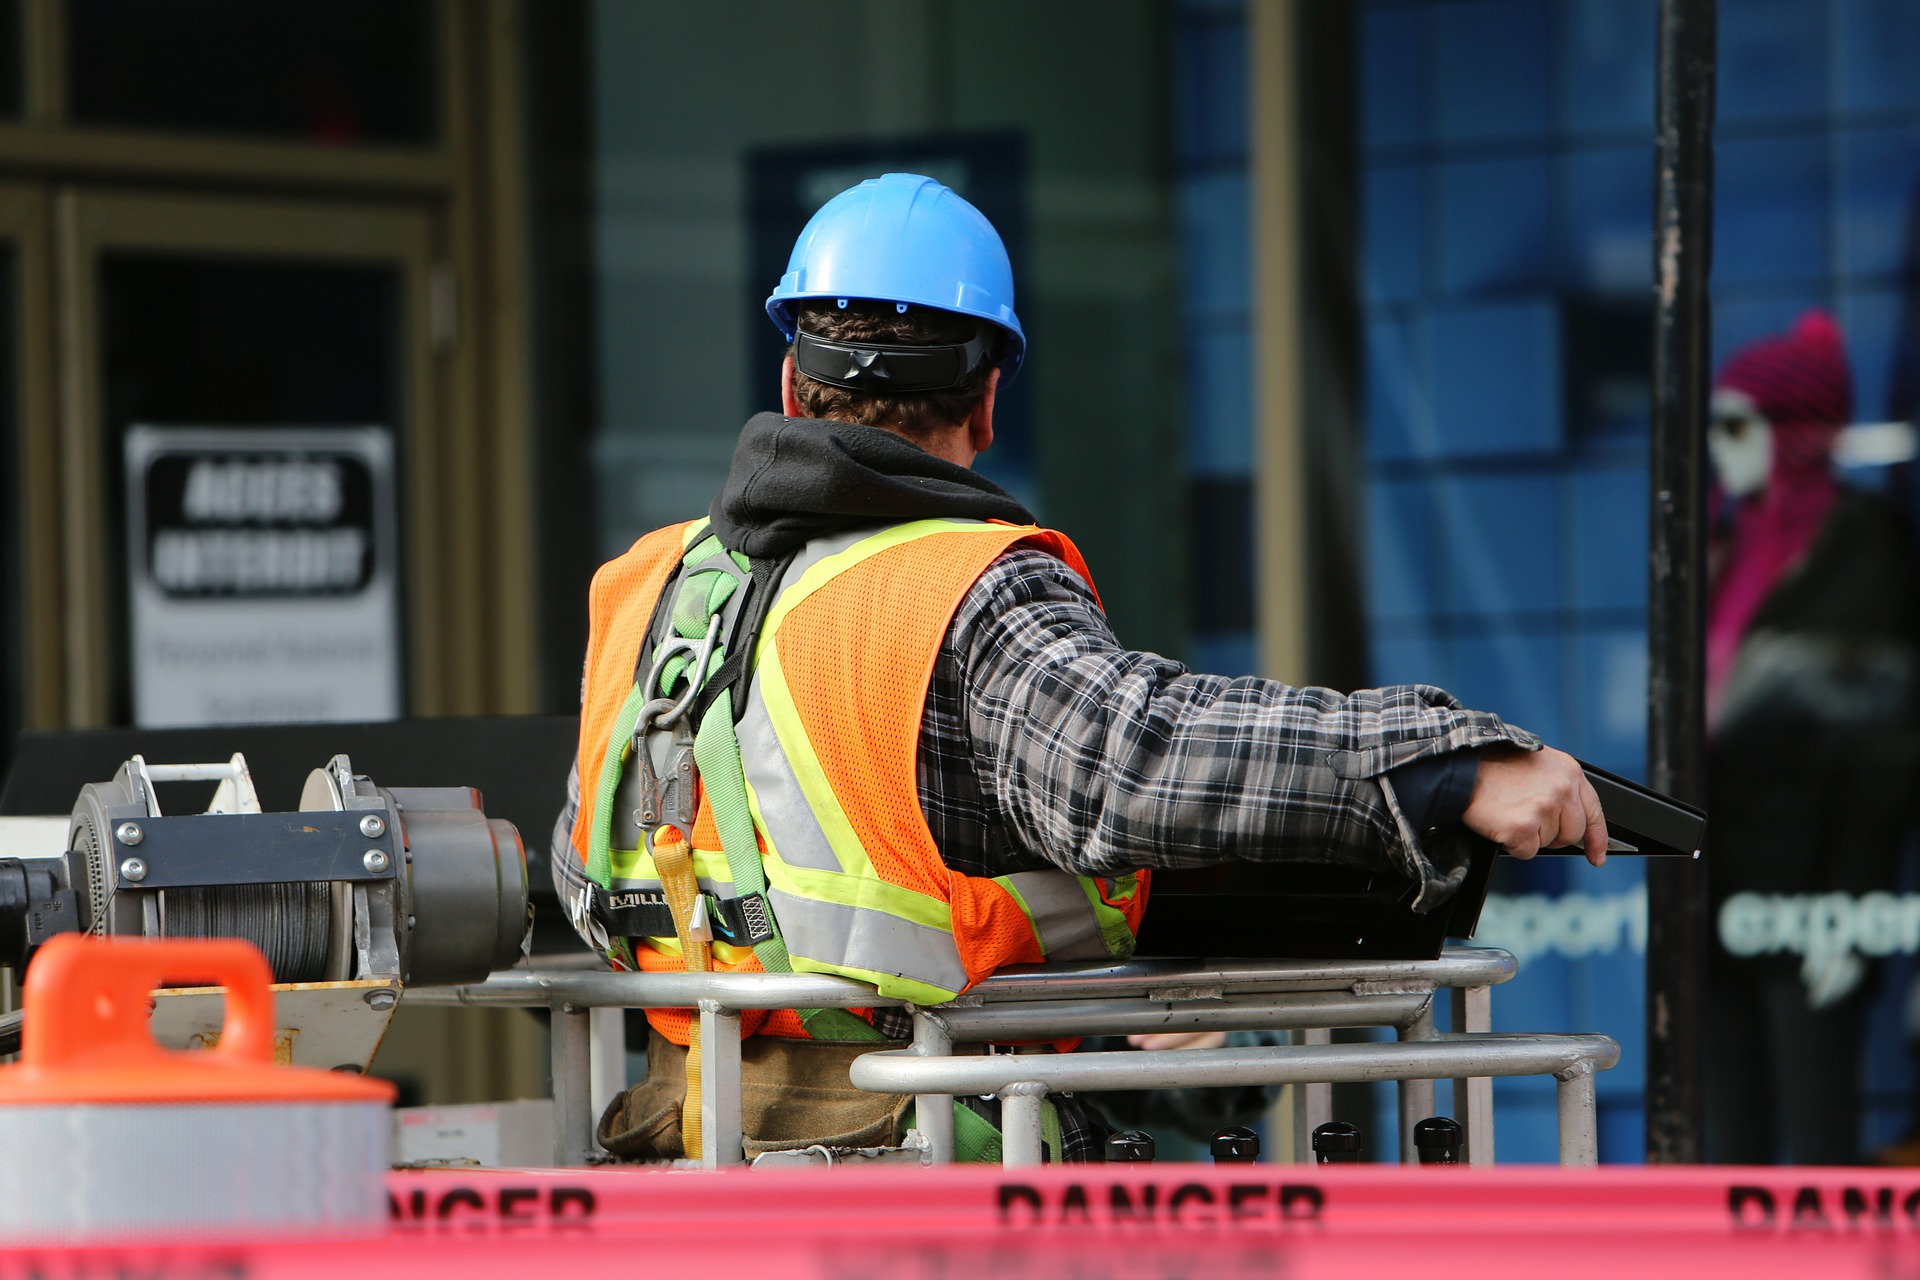 Workers Compensation and Indemnification Clause